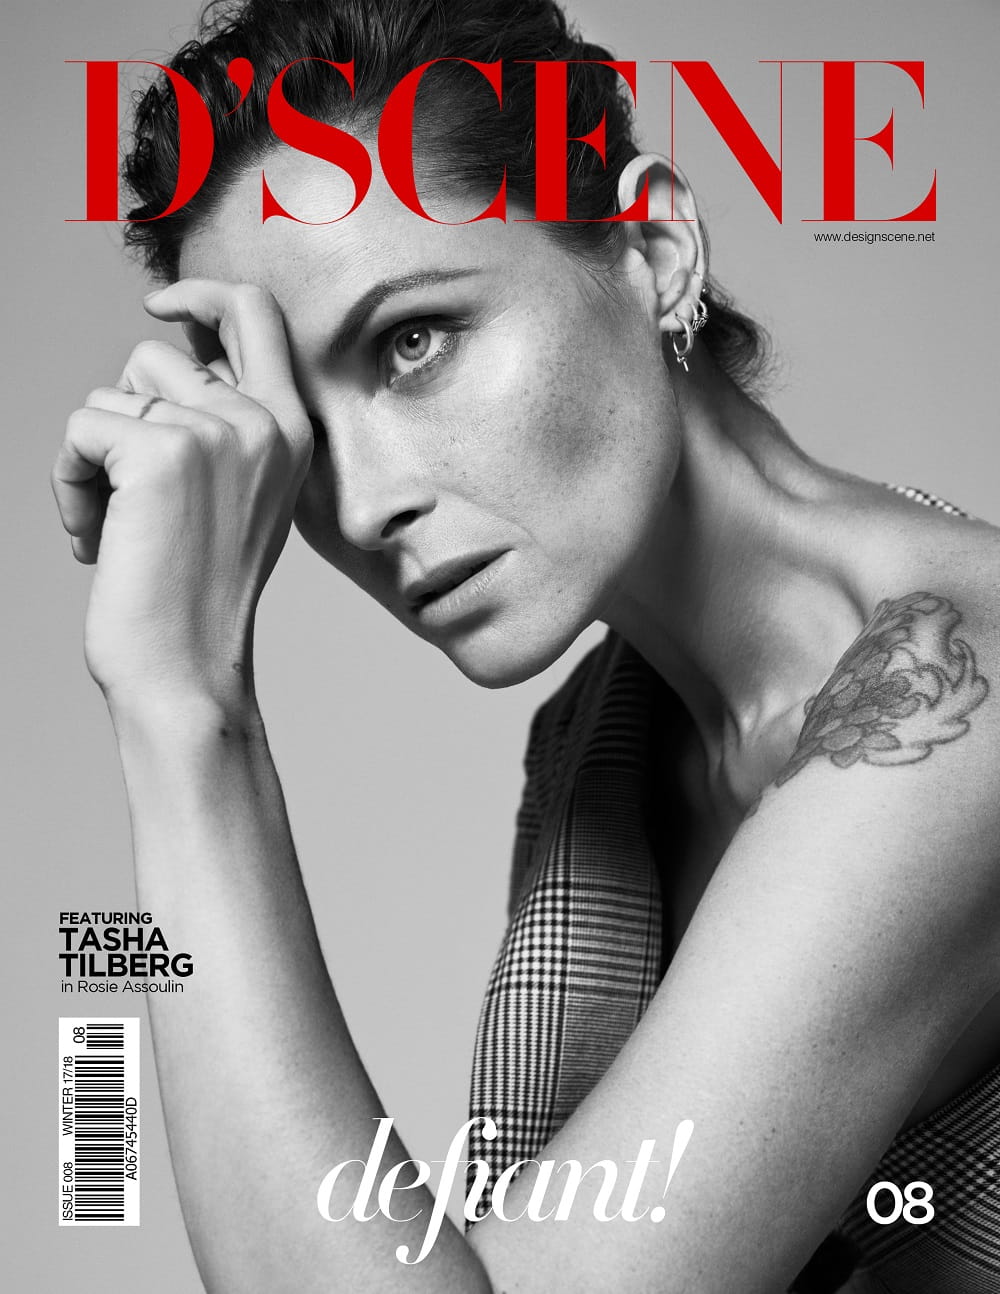 Tasha Tilberg Covers D’SCENE Magazine Winter 2018, wearing jacket from Rosie Assoulin Fall-Winter 2017 Collection